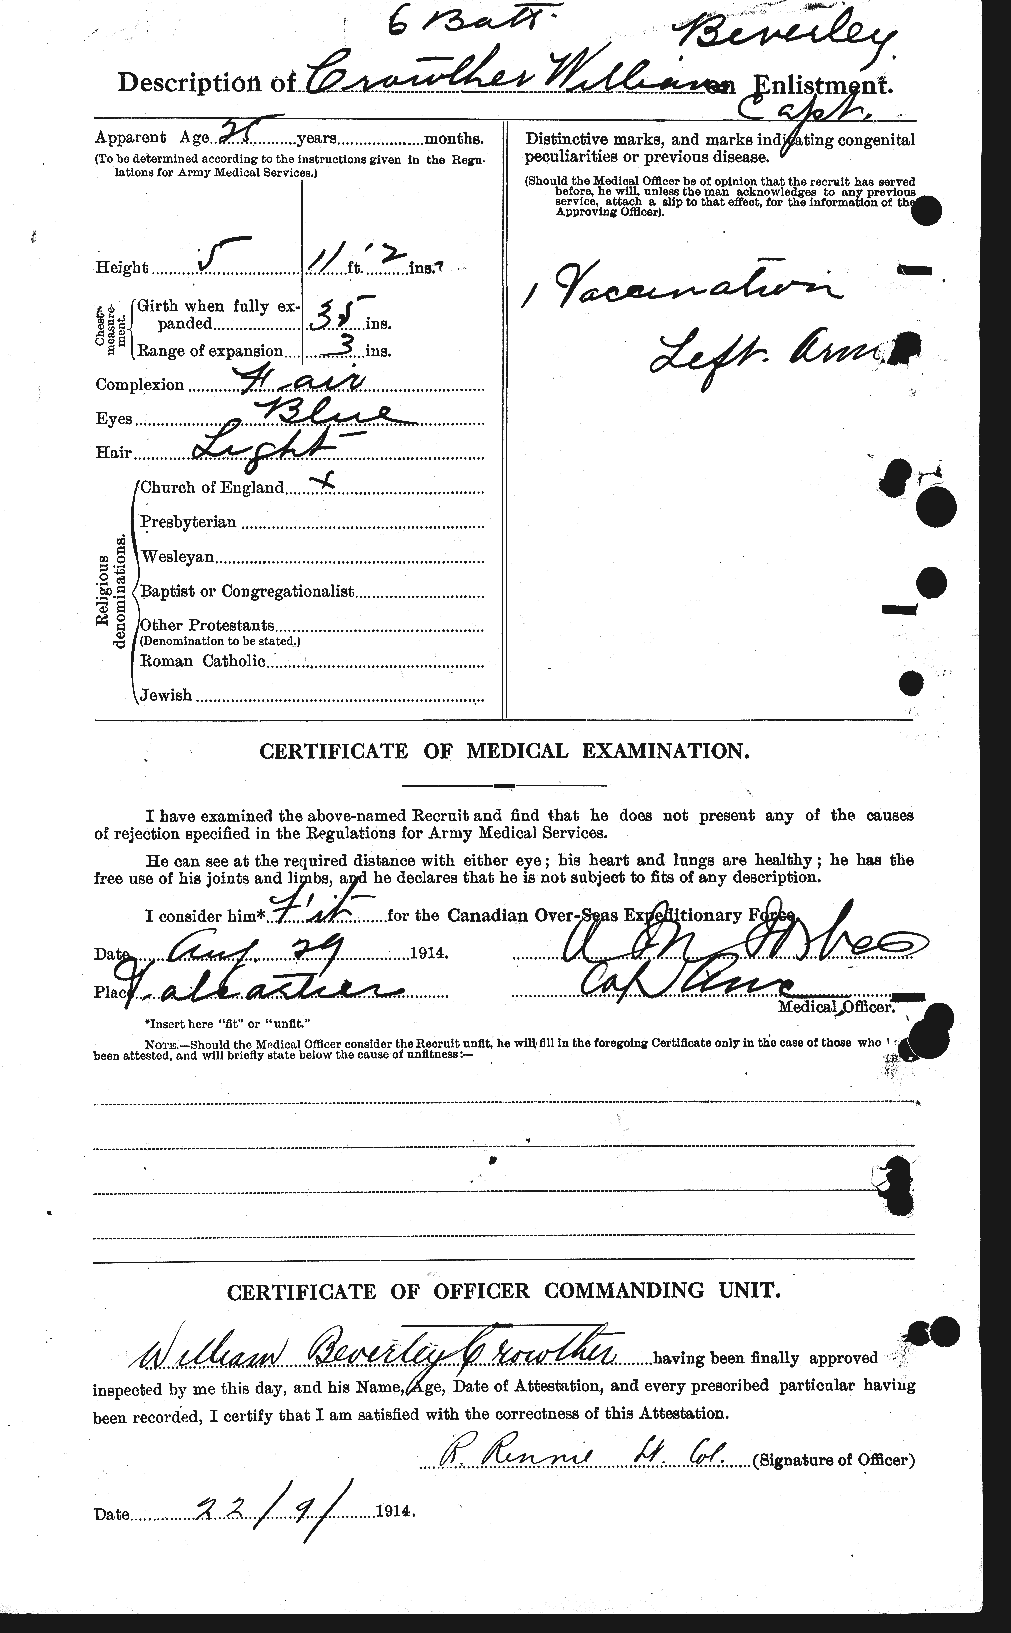 Attestation record: William Beverley Crowther